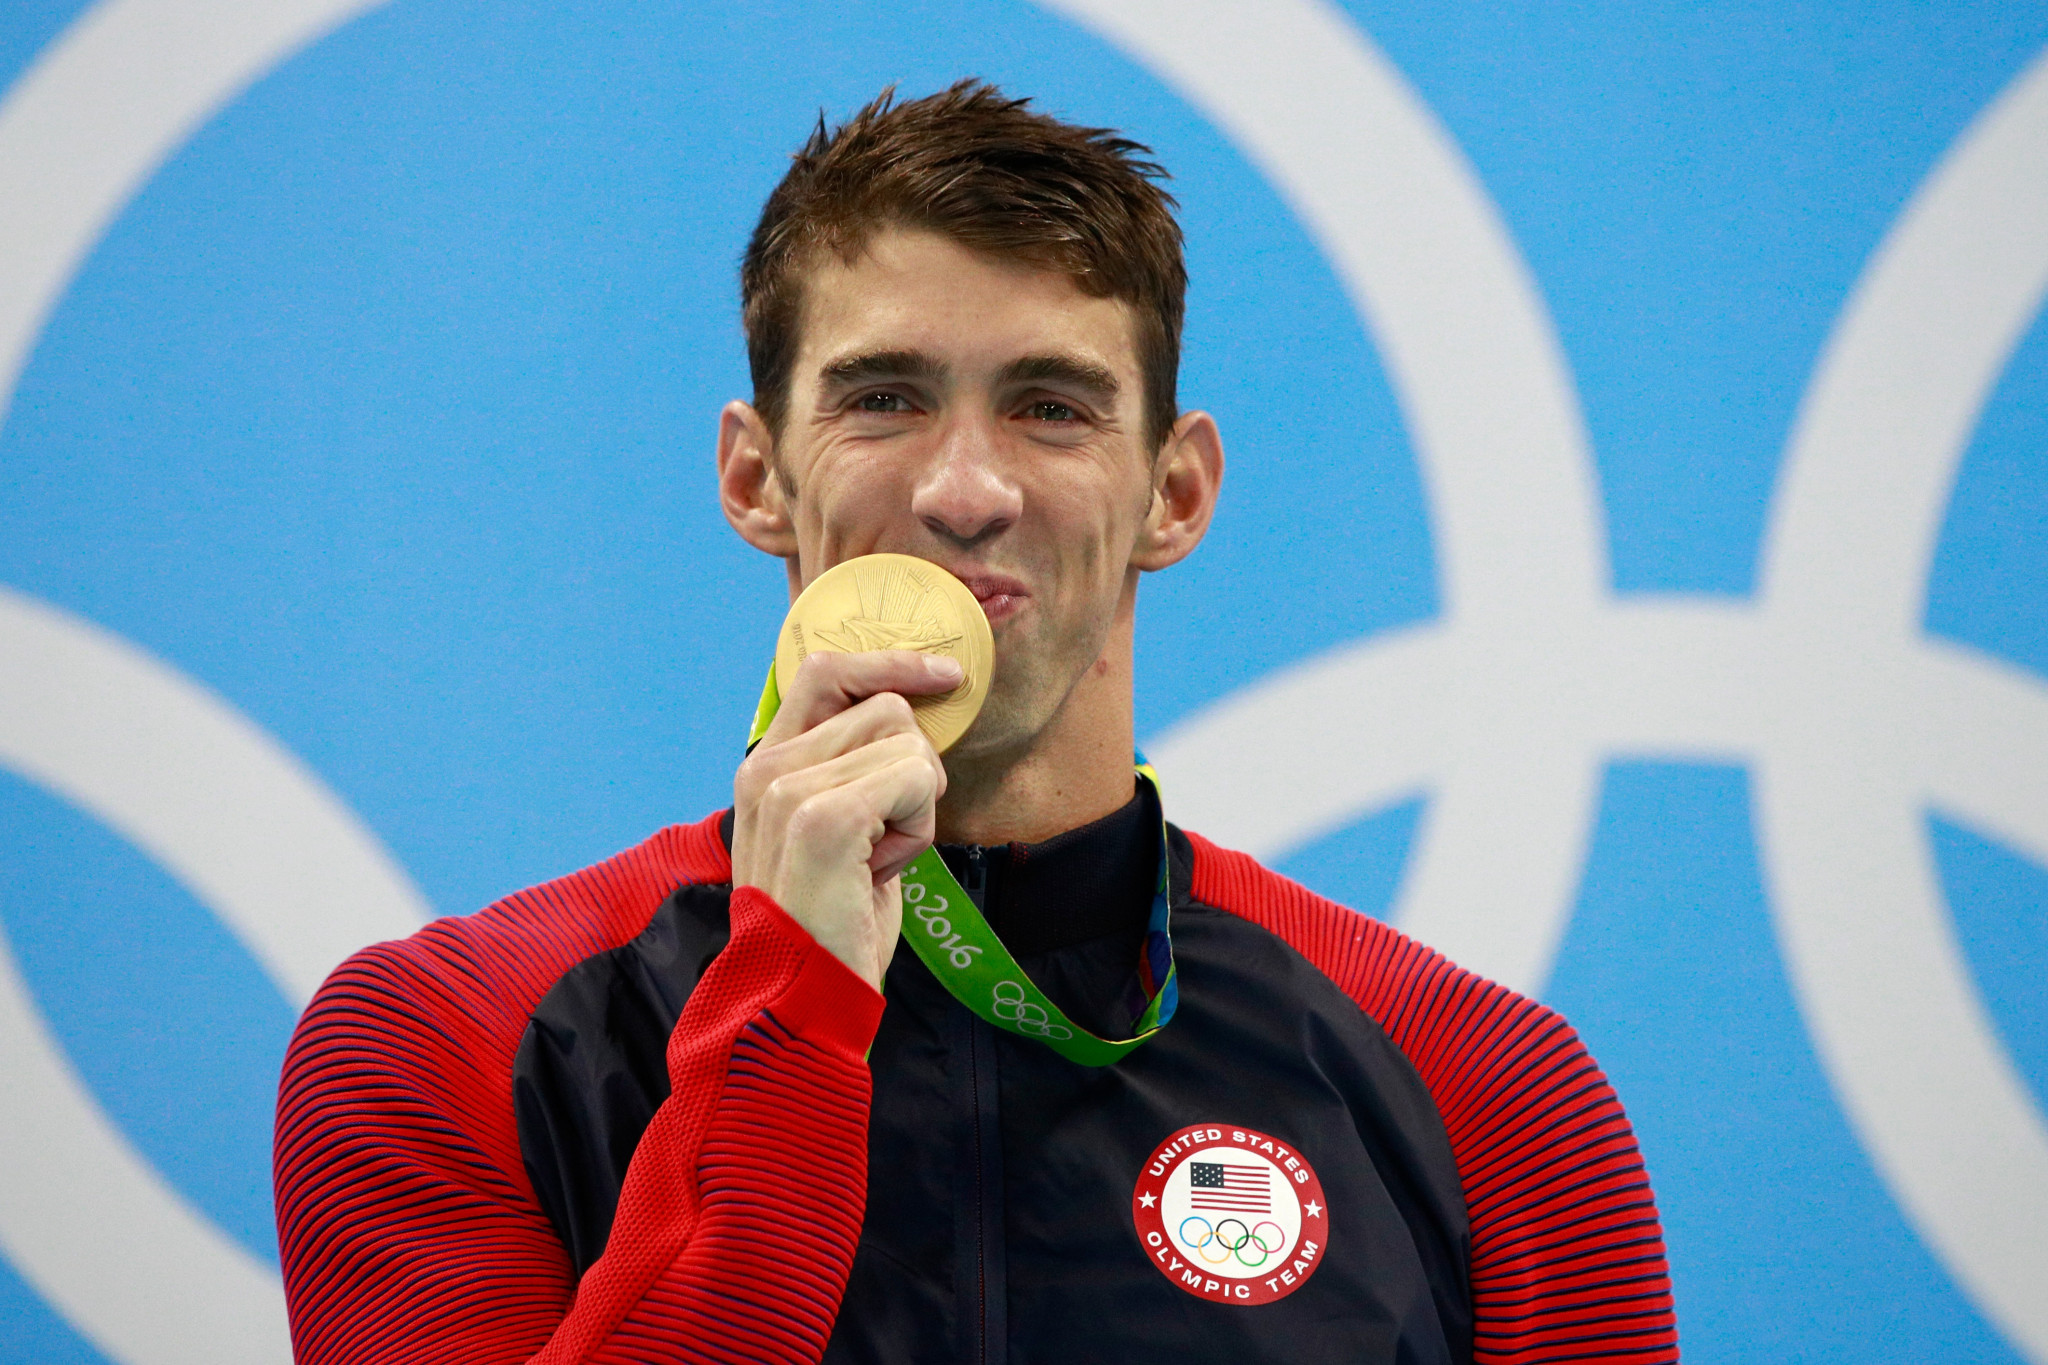 Michael Phelps won 23 Olympic gold medals, but swimming presented plenty of opportunities to top the podium ©Getty Images